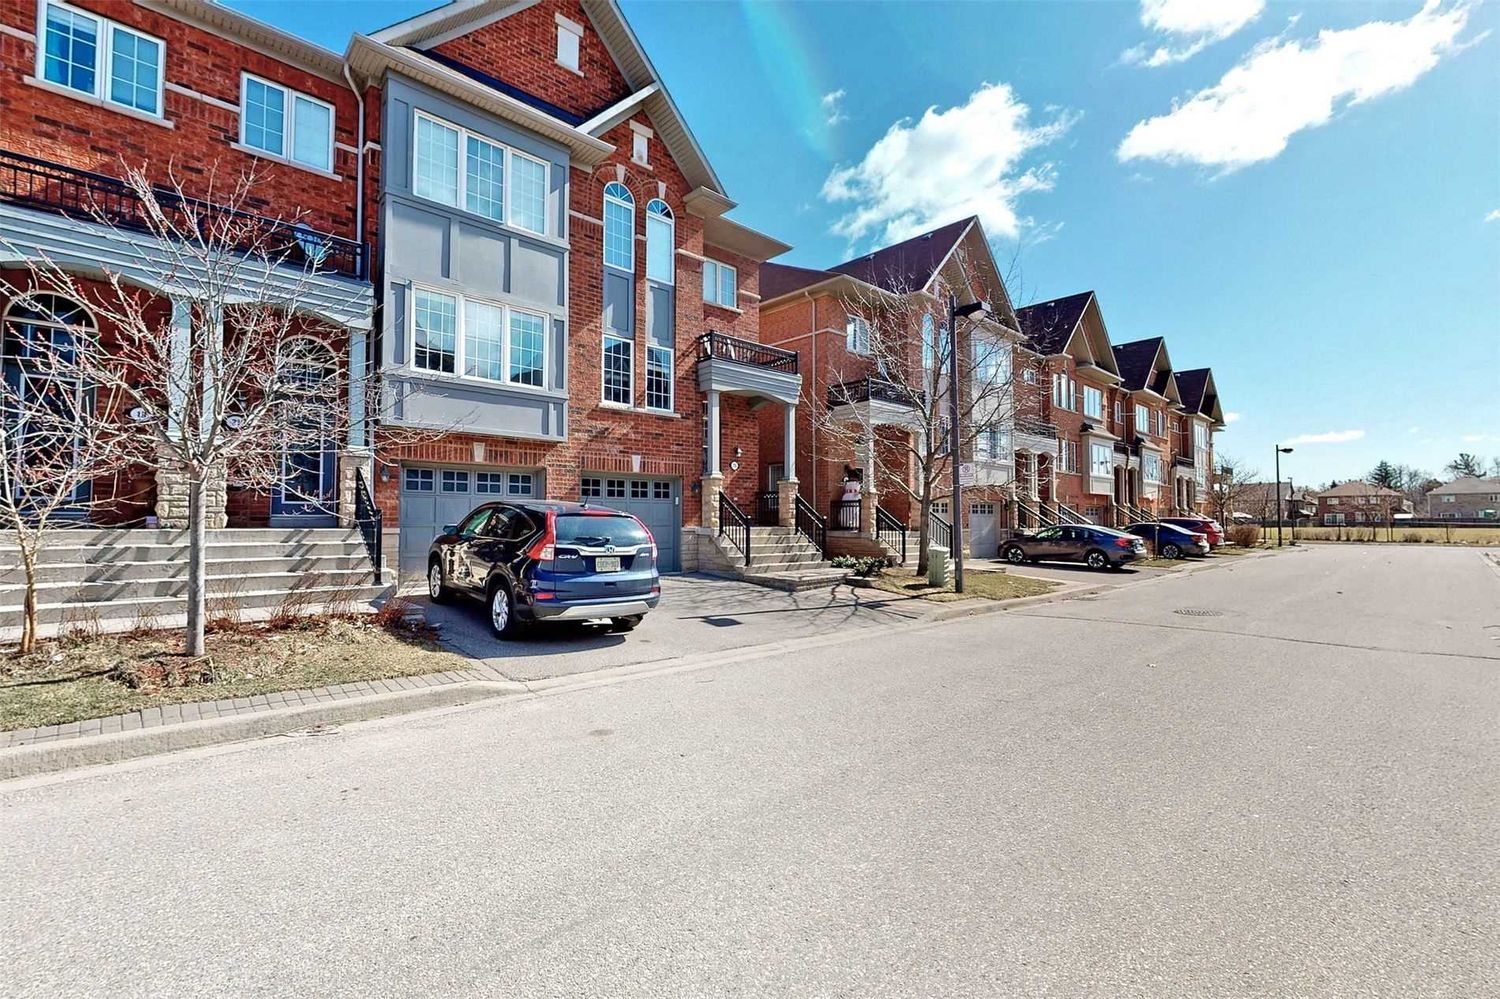 230 Paisley Boulevard W. 230 Paisley Boulevard West Townhomes is located in  Mississauga, Toronto - image #2 of 2